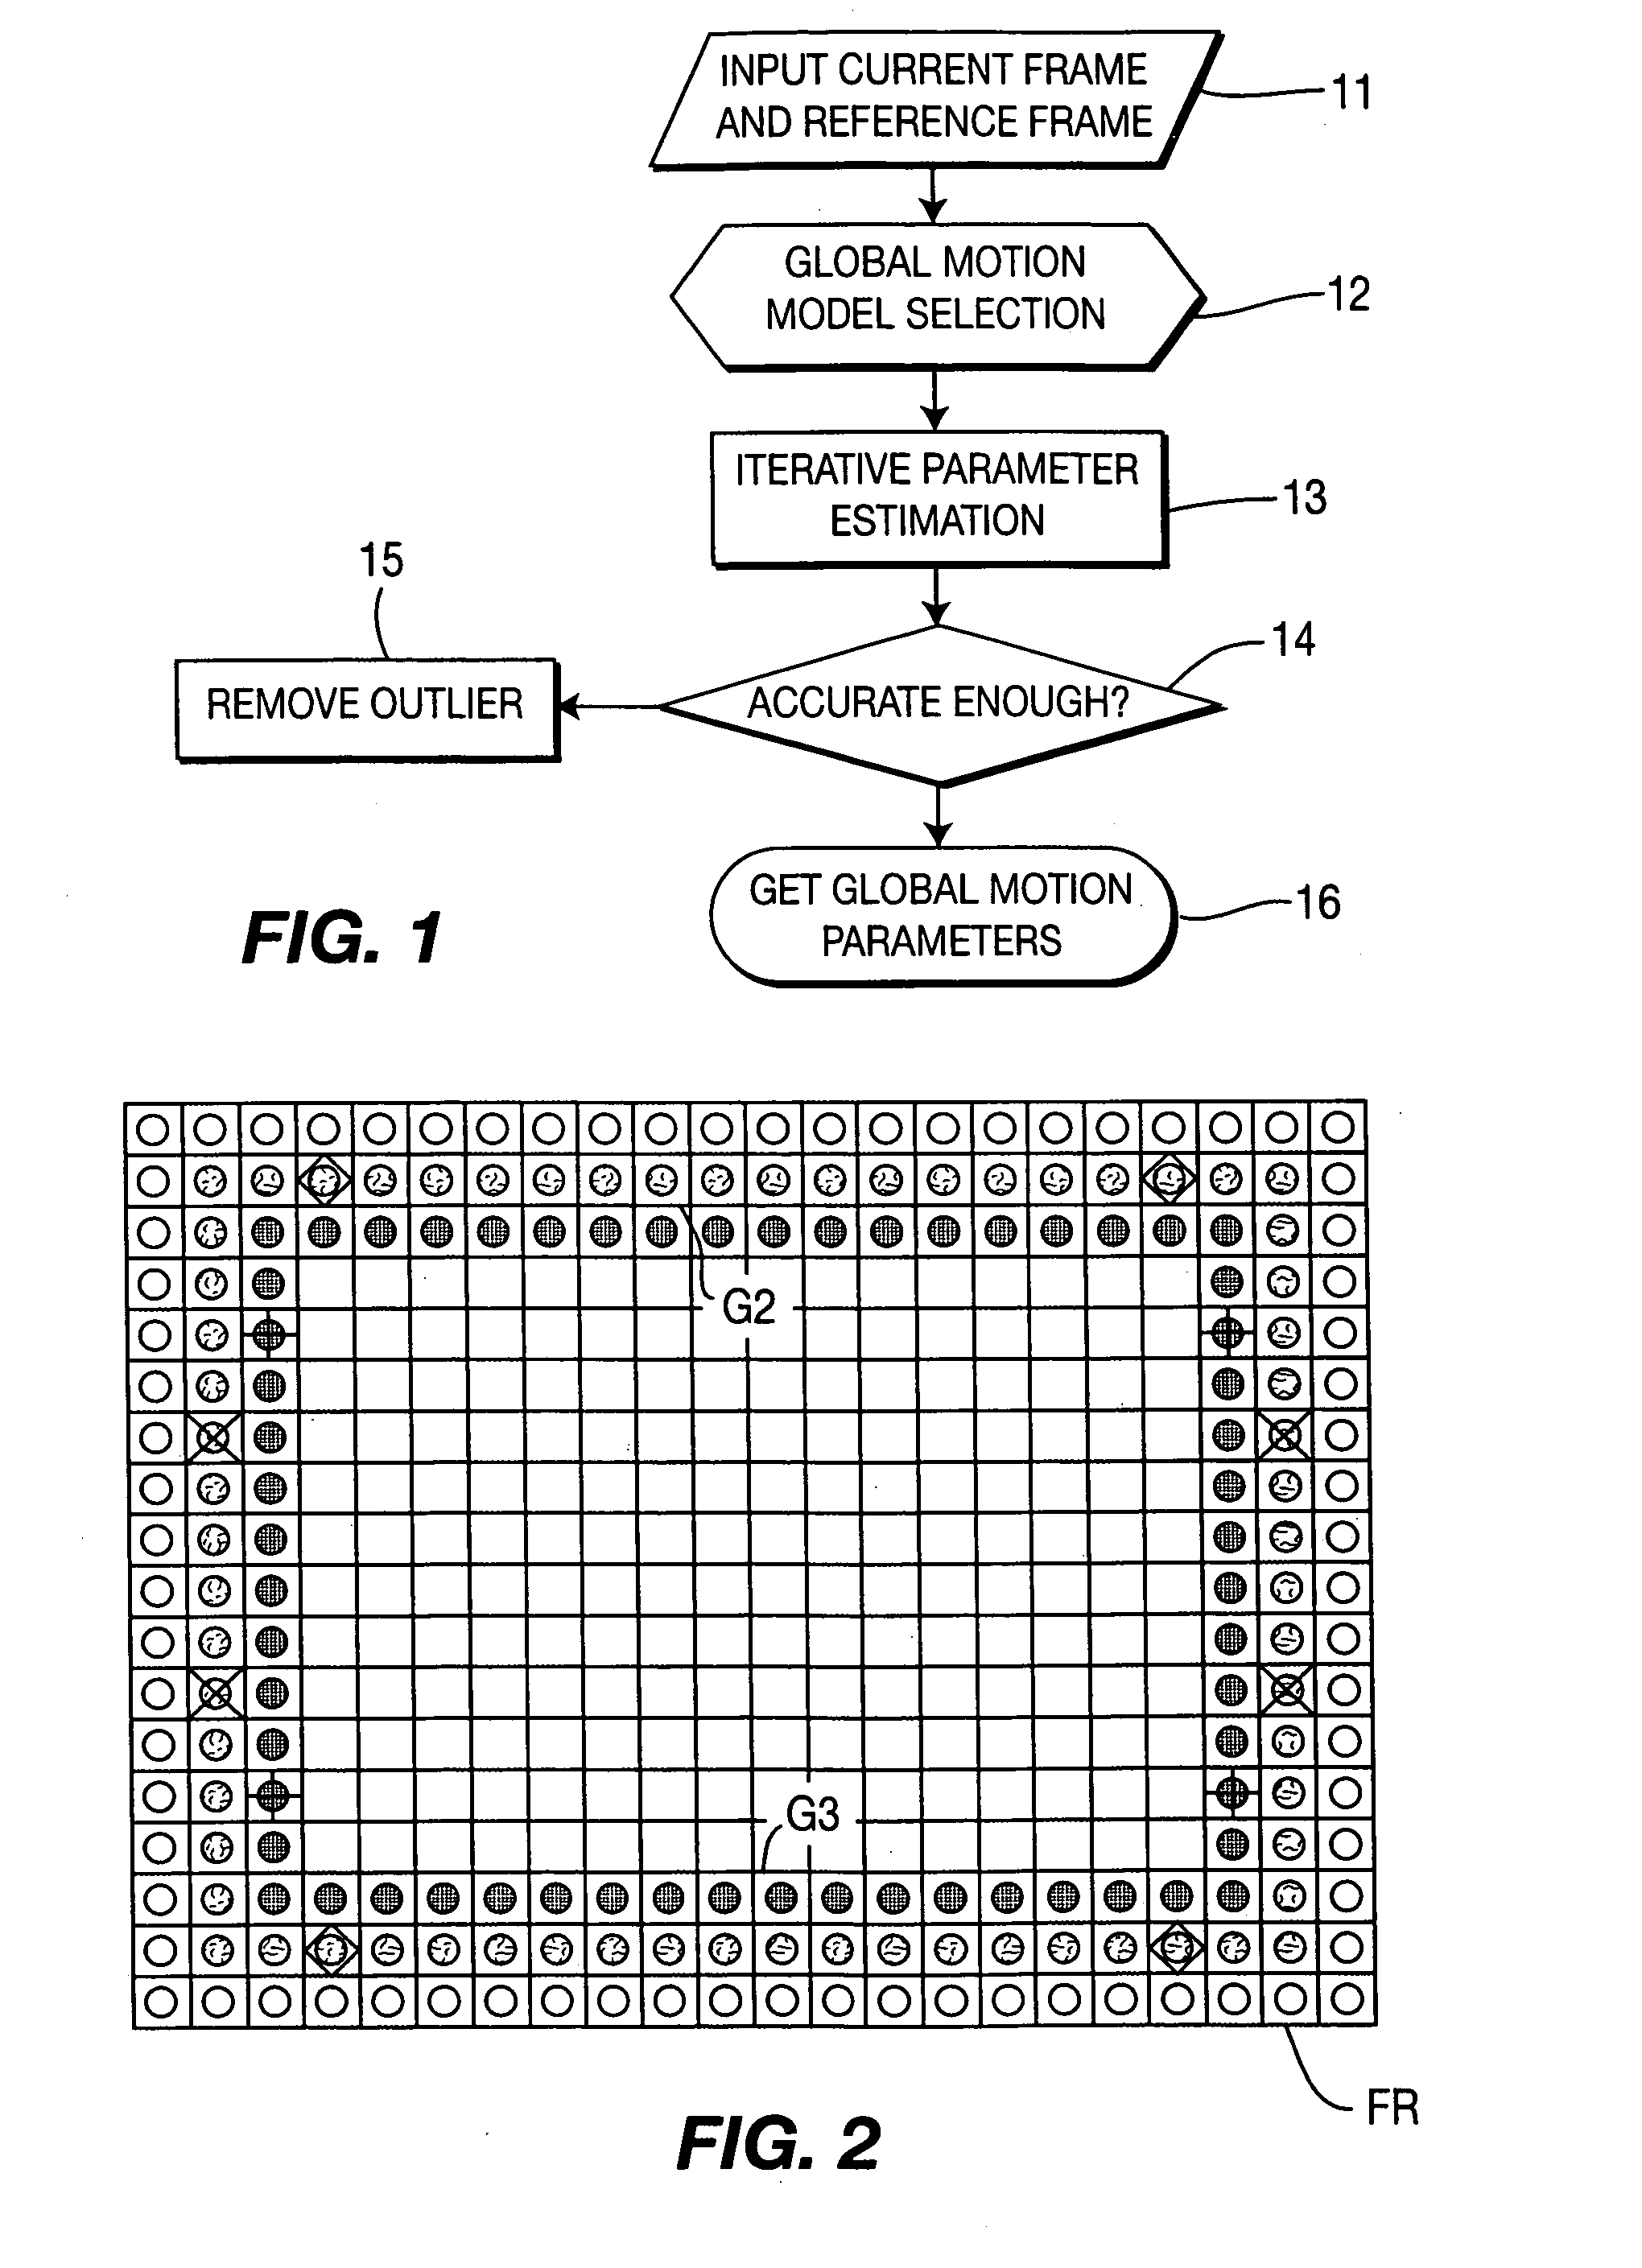 Method and apparatus for calculating interatively for a picture or a picture sequence a set of global motion parameters from motion vectors assigned to blocks into which each picture is divided